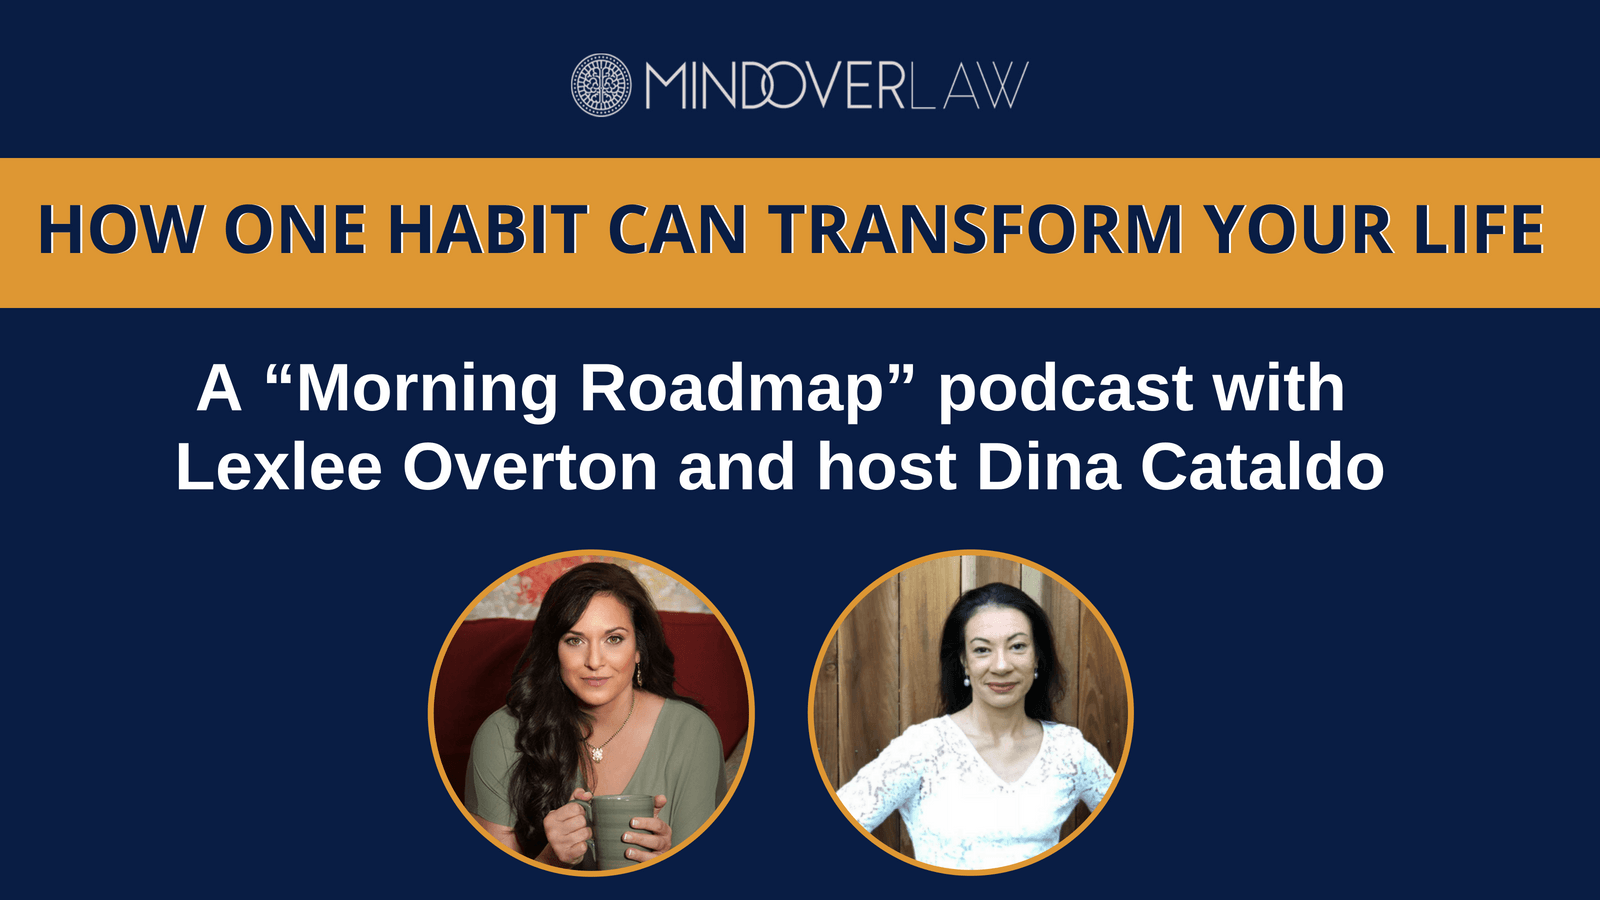 How One Habit Can Transform Your Life A “Morning Roadmap” podcast with Lexlee Overton and host Dina Catald _ meditation for lawyers _ mind over law